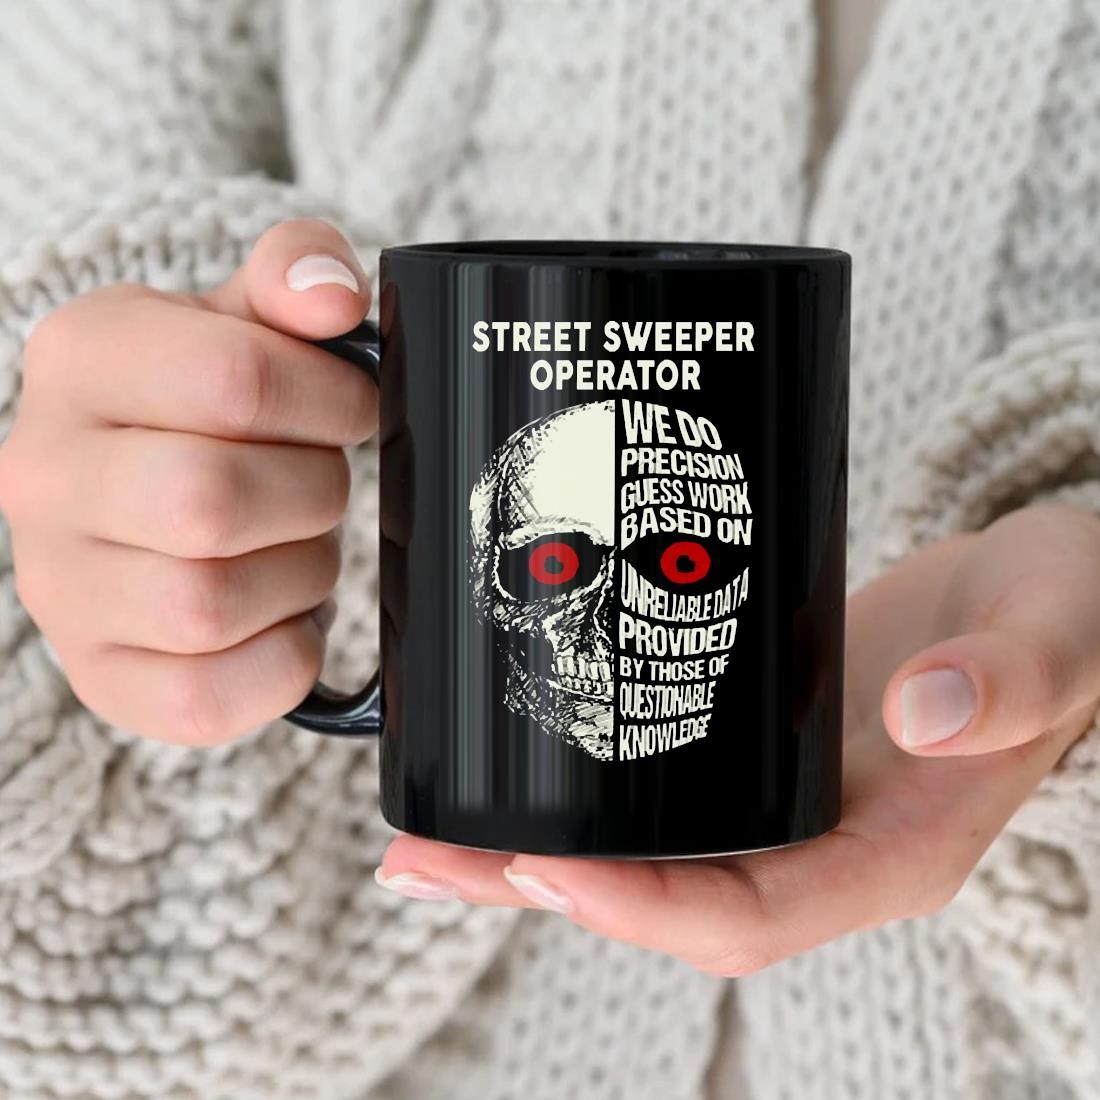 Street Sweeper Operator We Do Precision Guess Work Based On Unreliable Data Provided By Those Of Questionable Knowledge Skull Mug